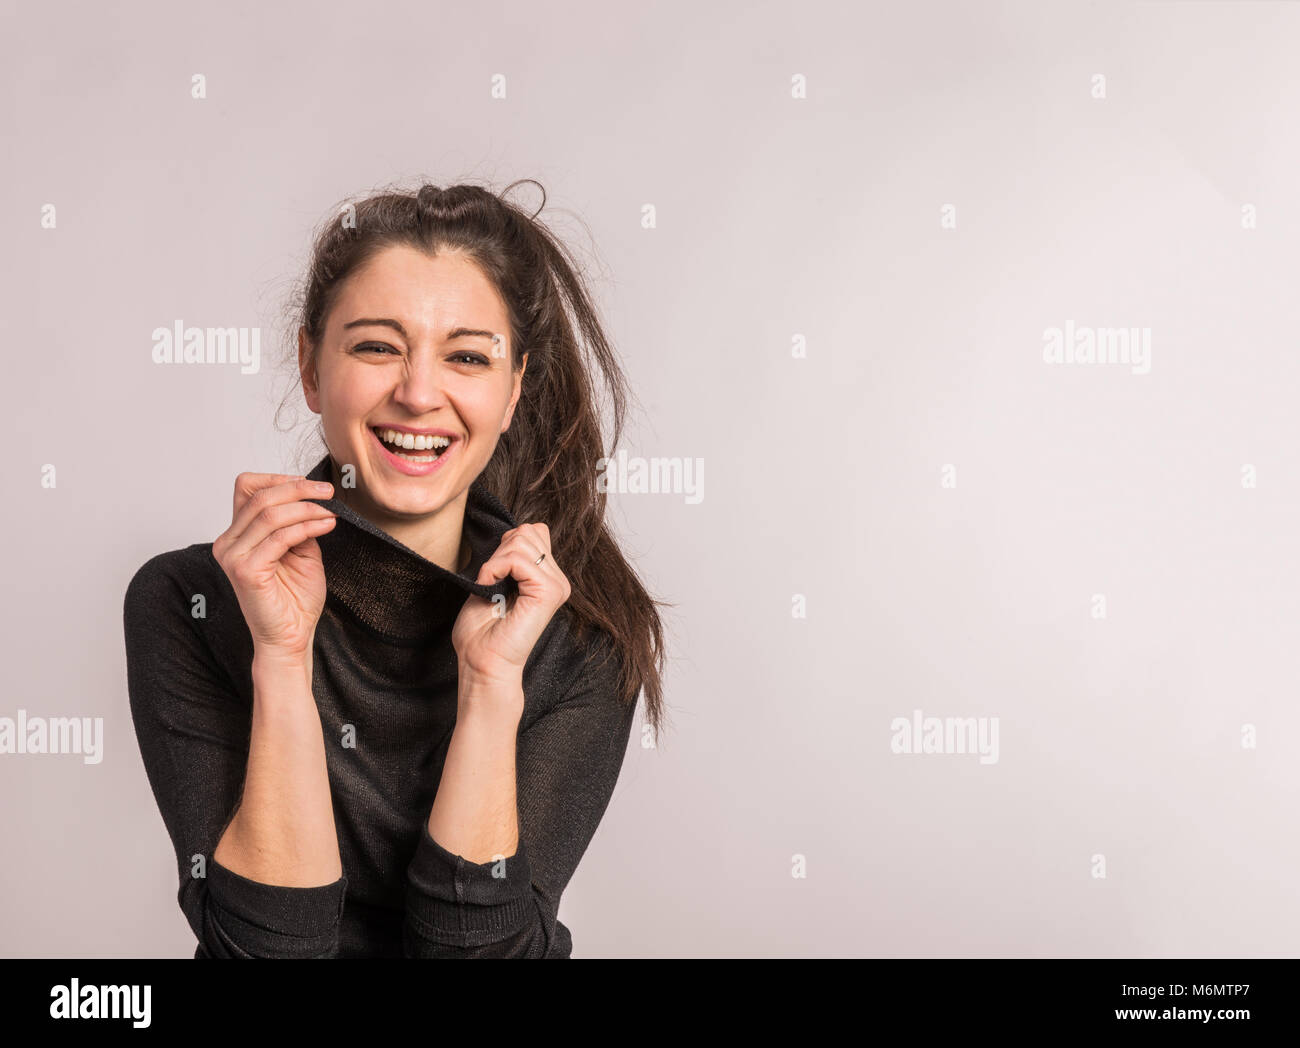 Portrait of a young beautiful woman in studio. Stock Photo